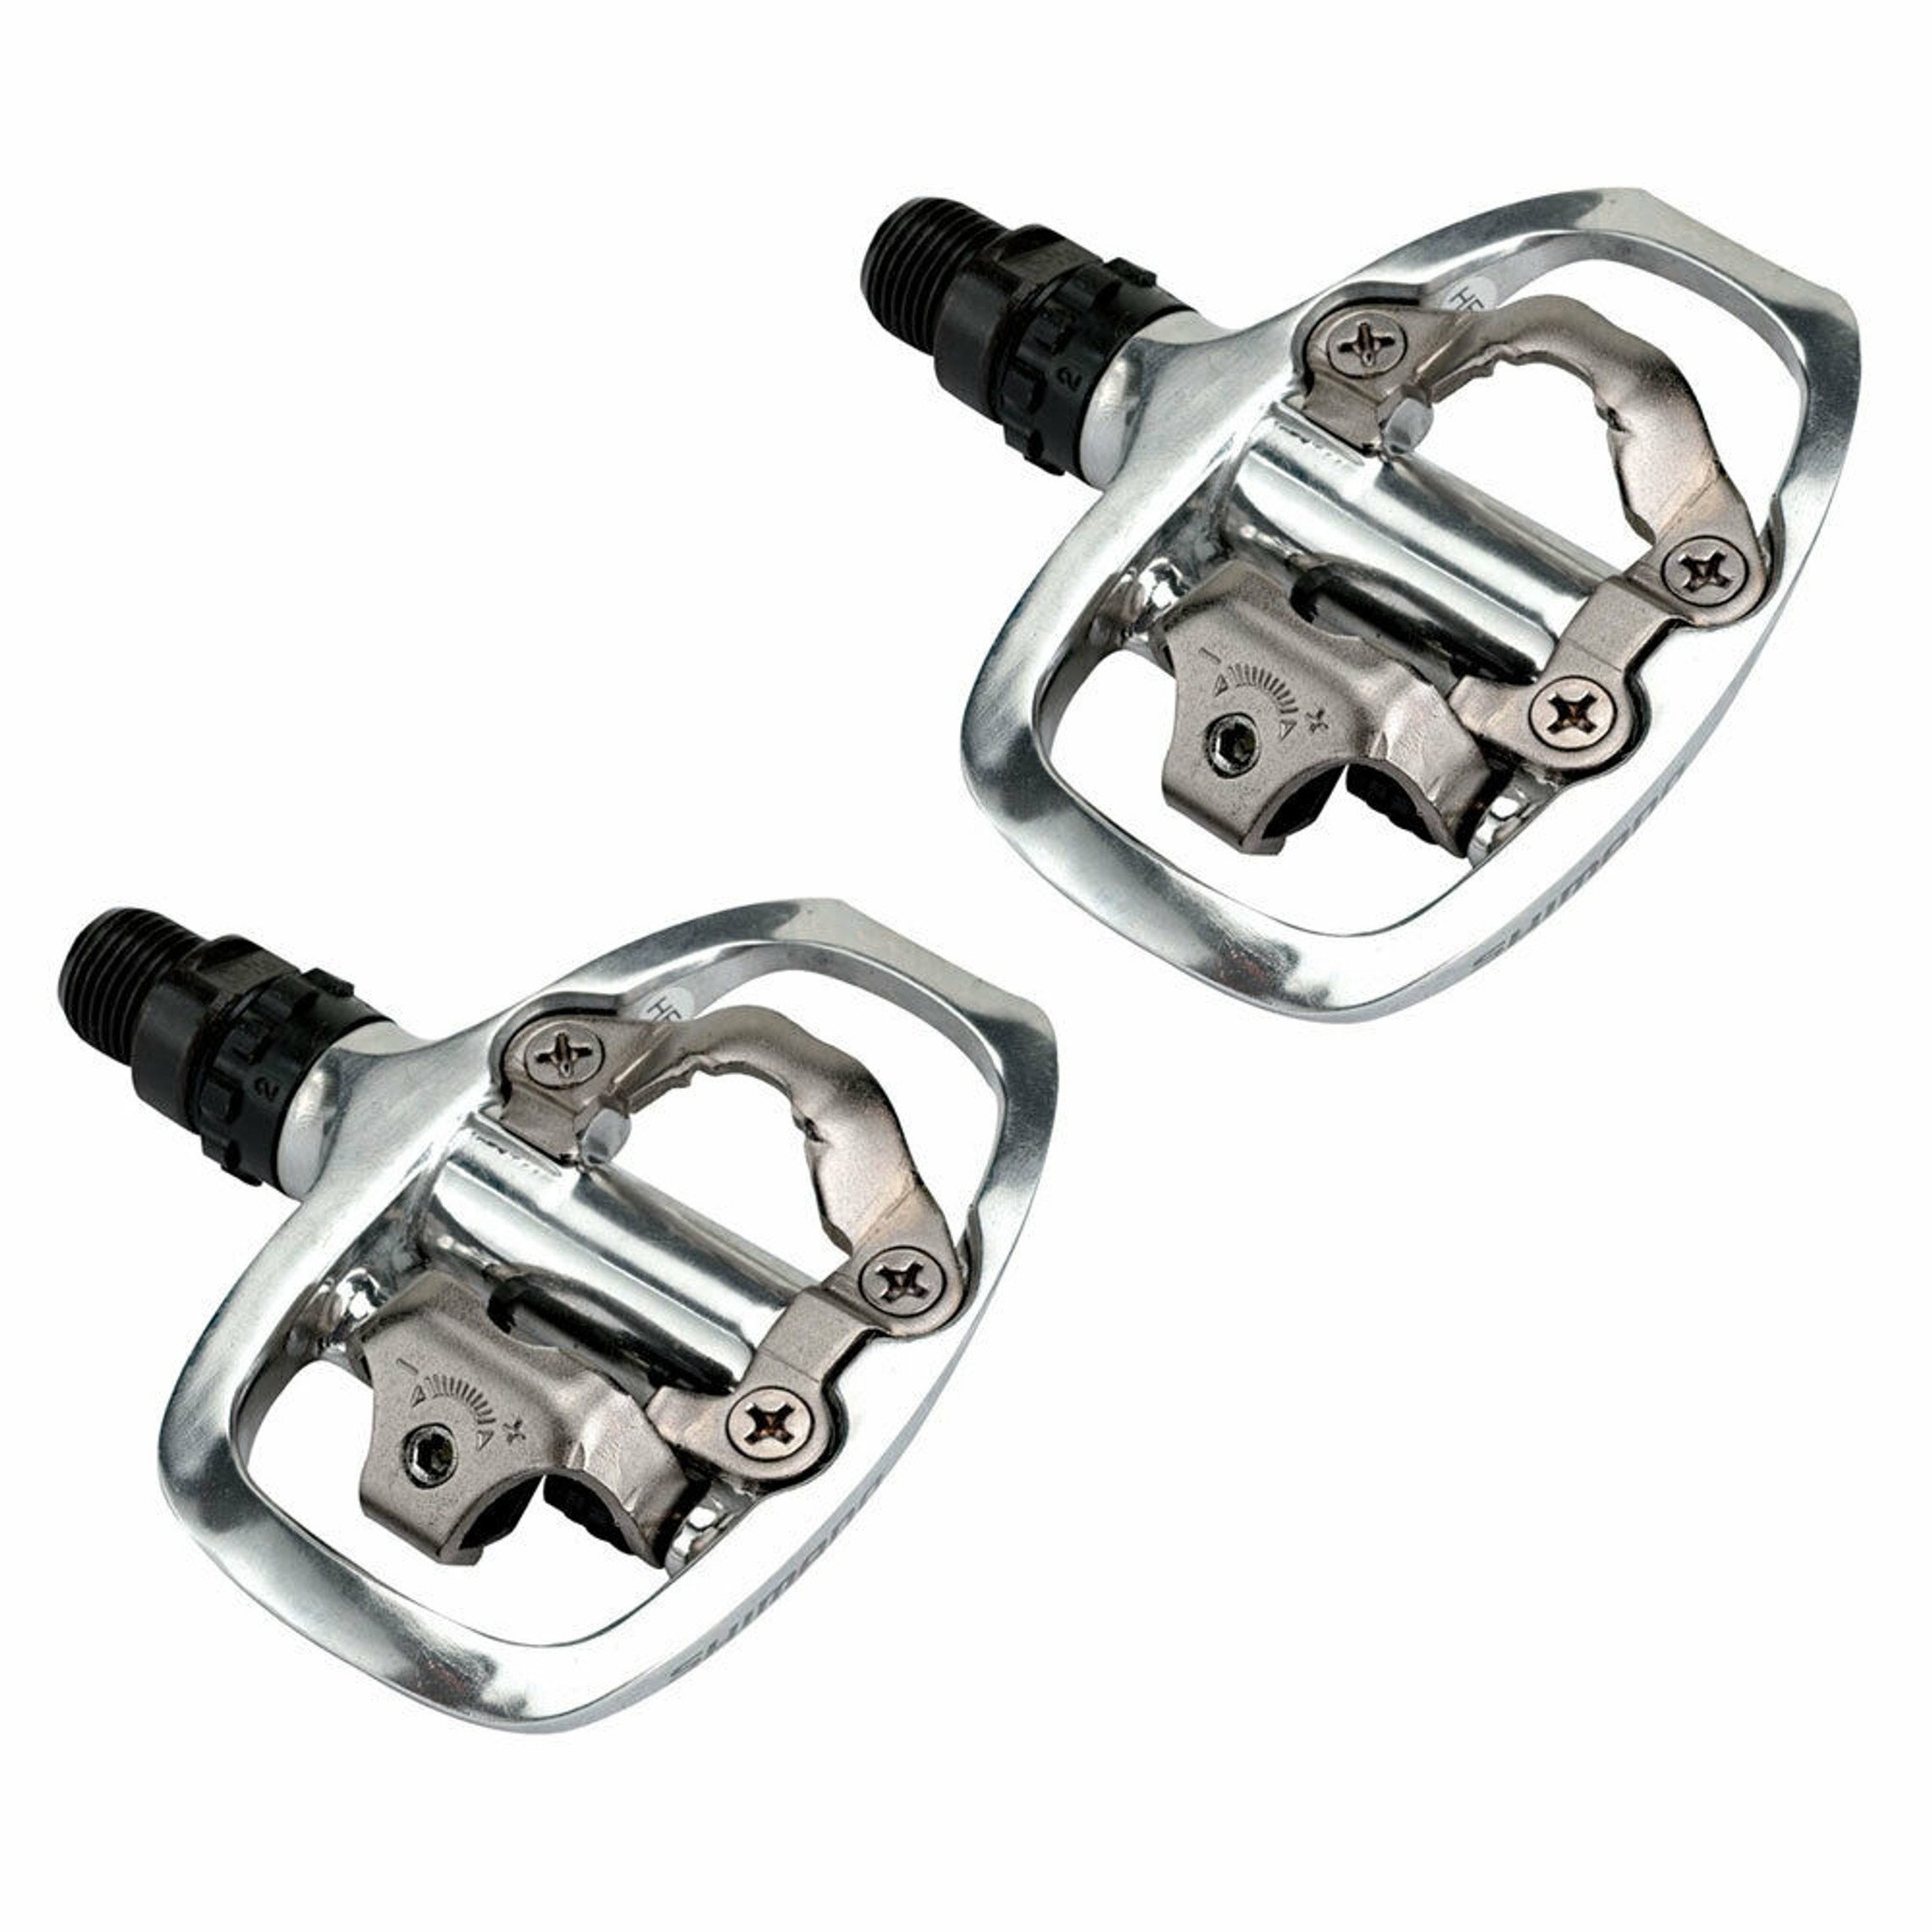 SHIMANO SPD-SL Pedal single sided for Road riding